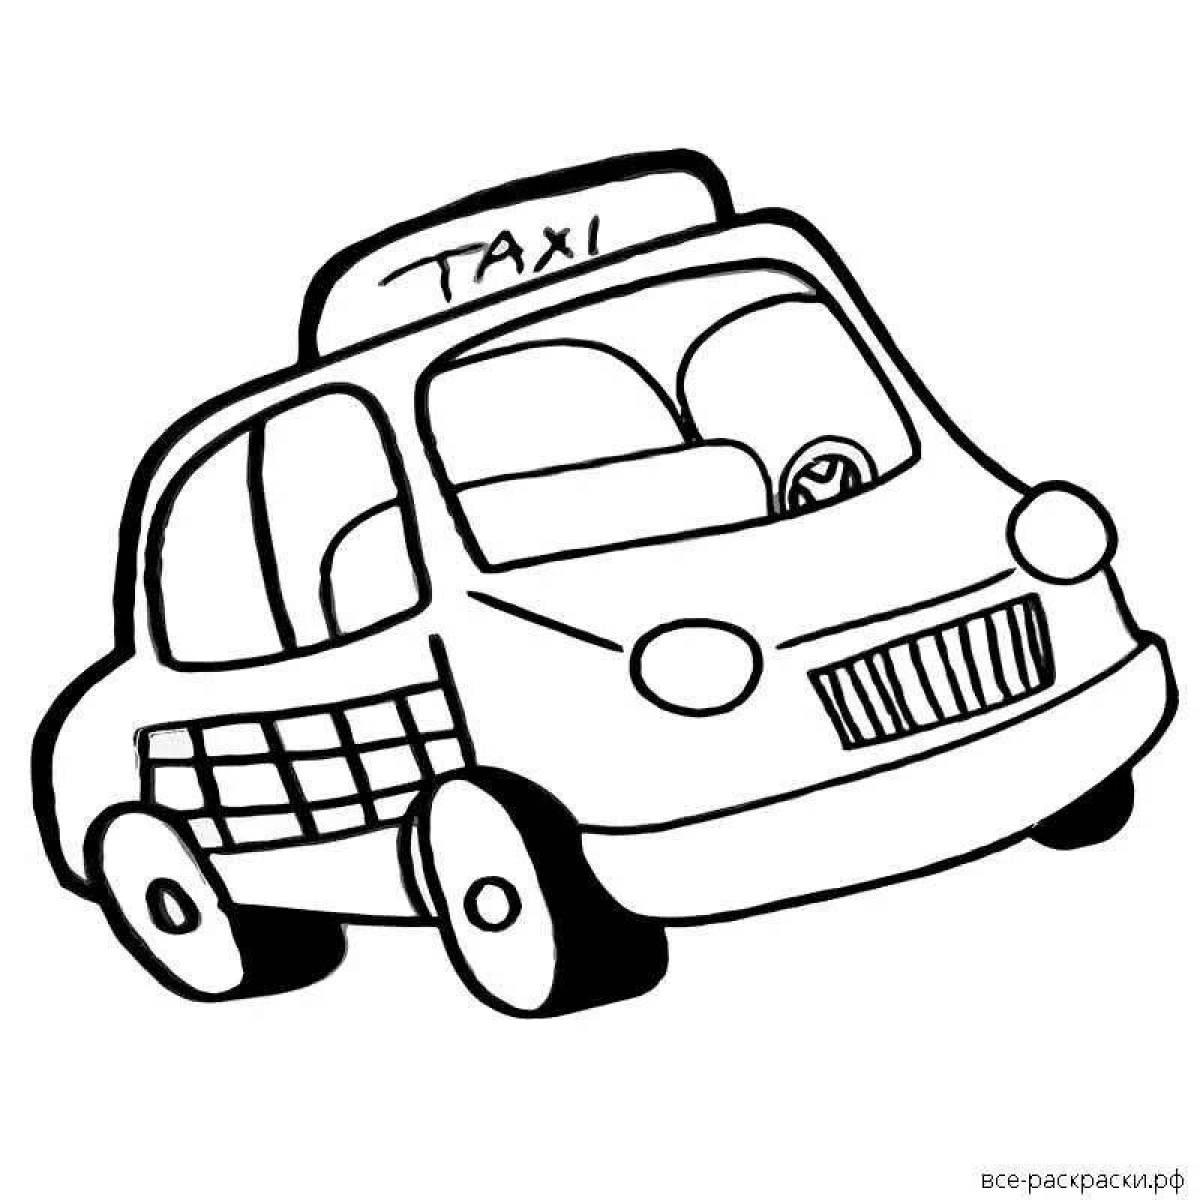 Humorous taxi coloring book